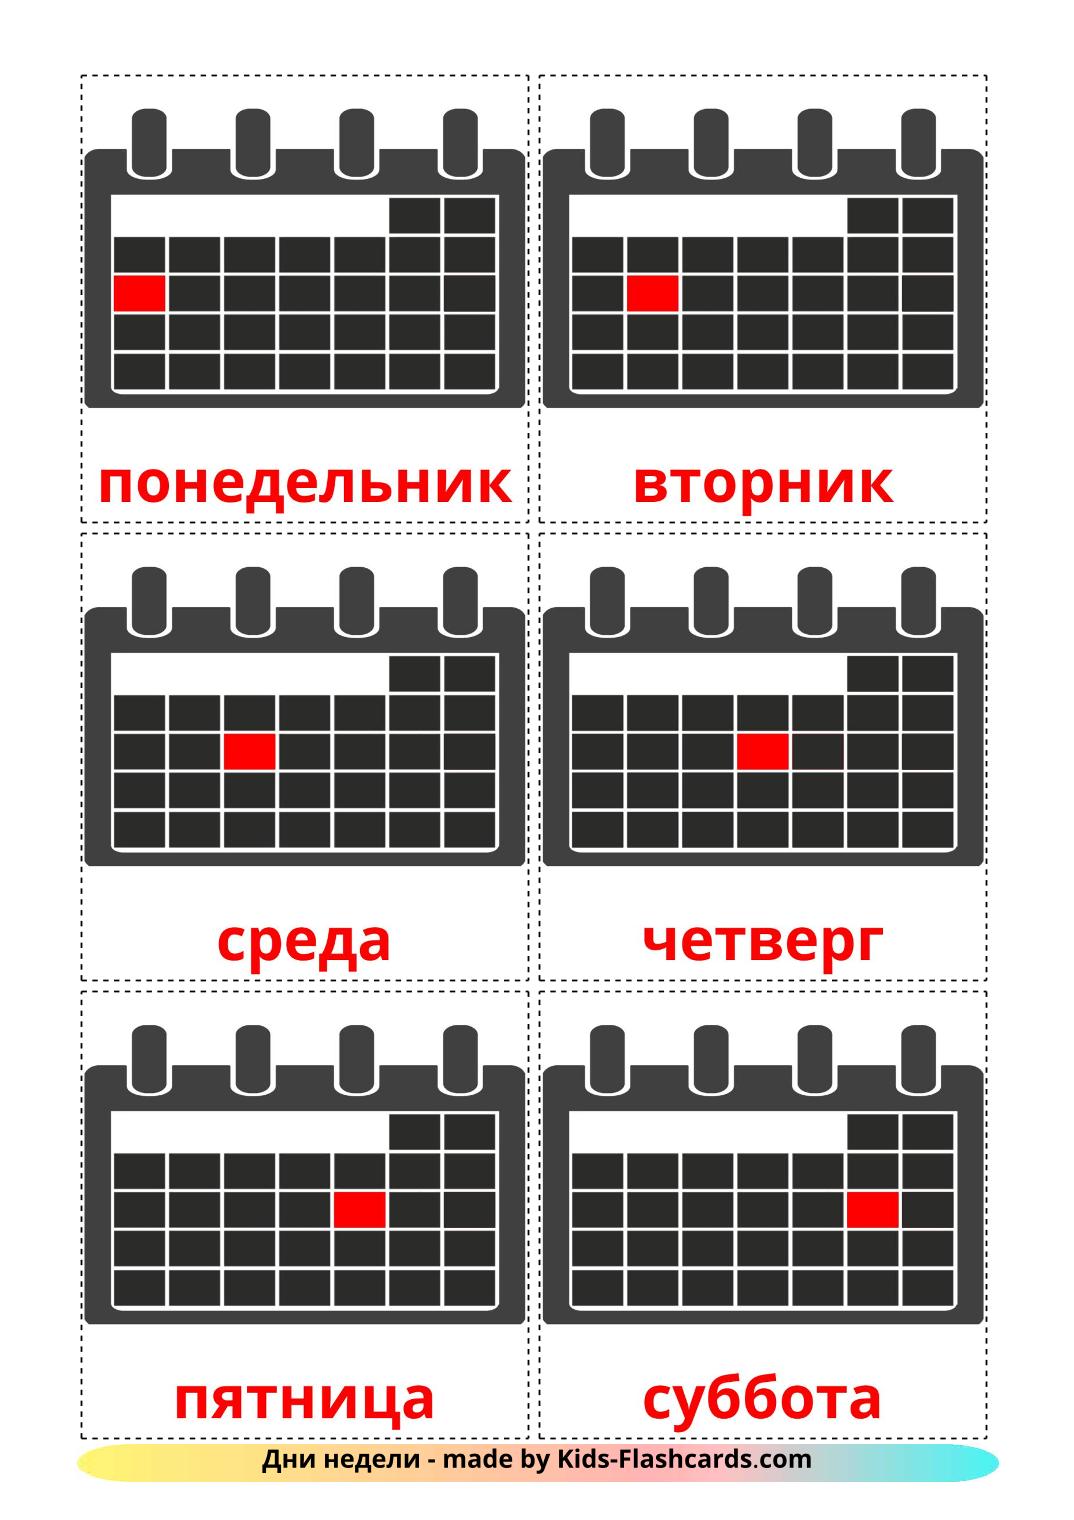 Days of Week - 12 Free Printable russian Flashcards 